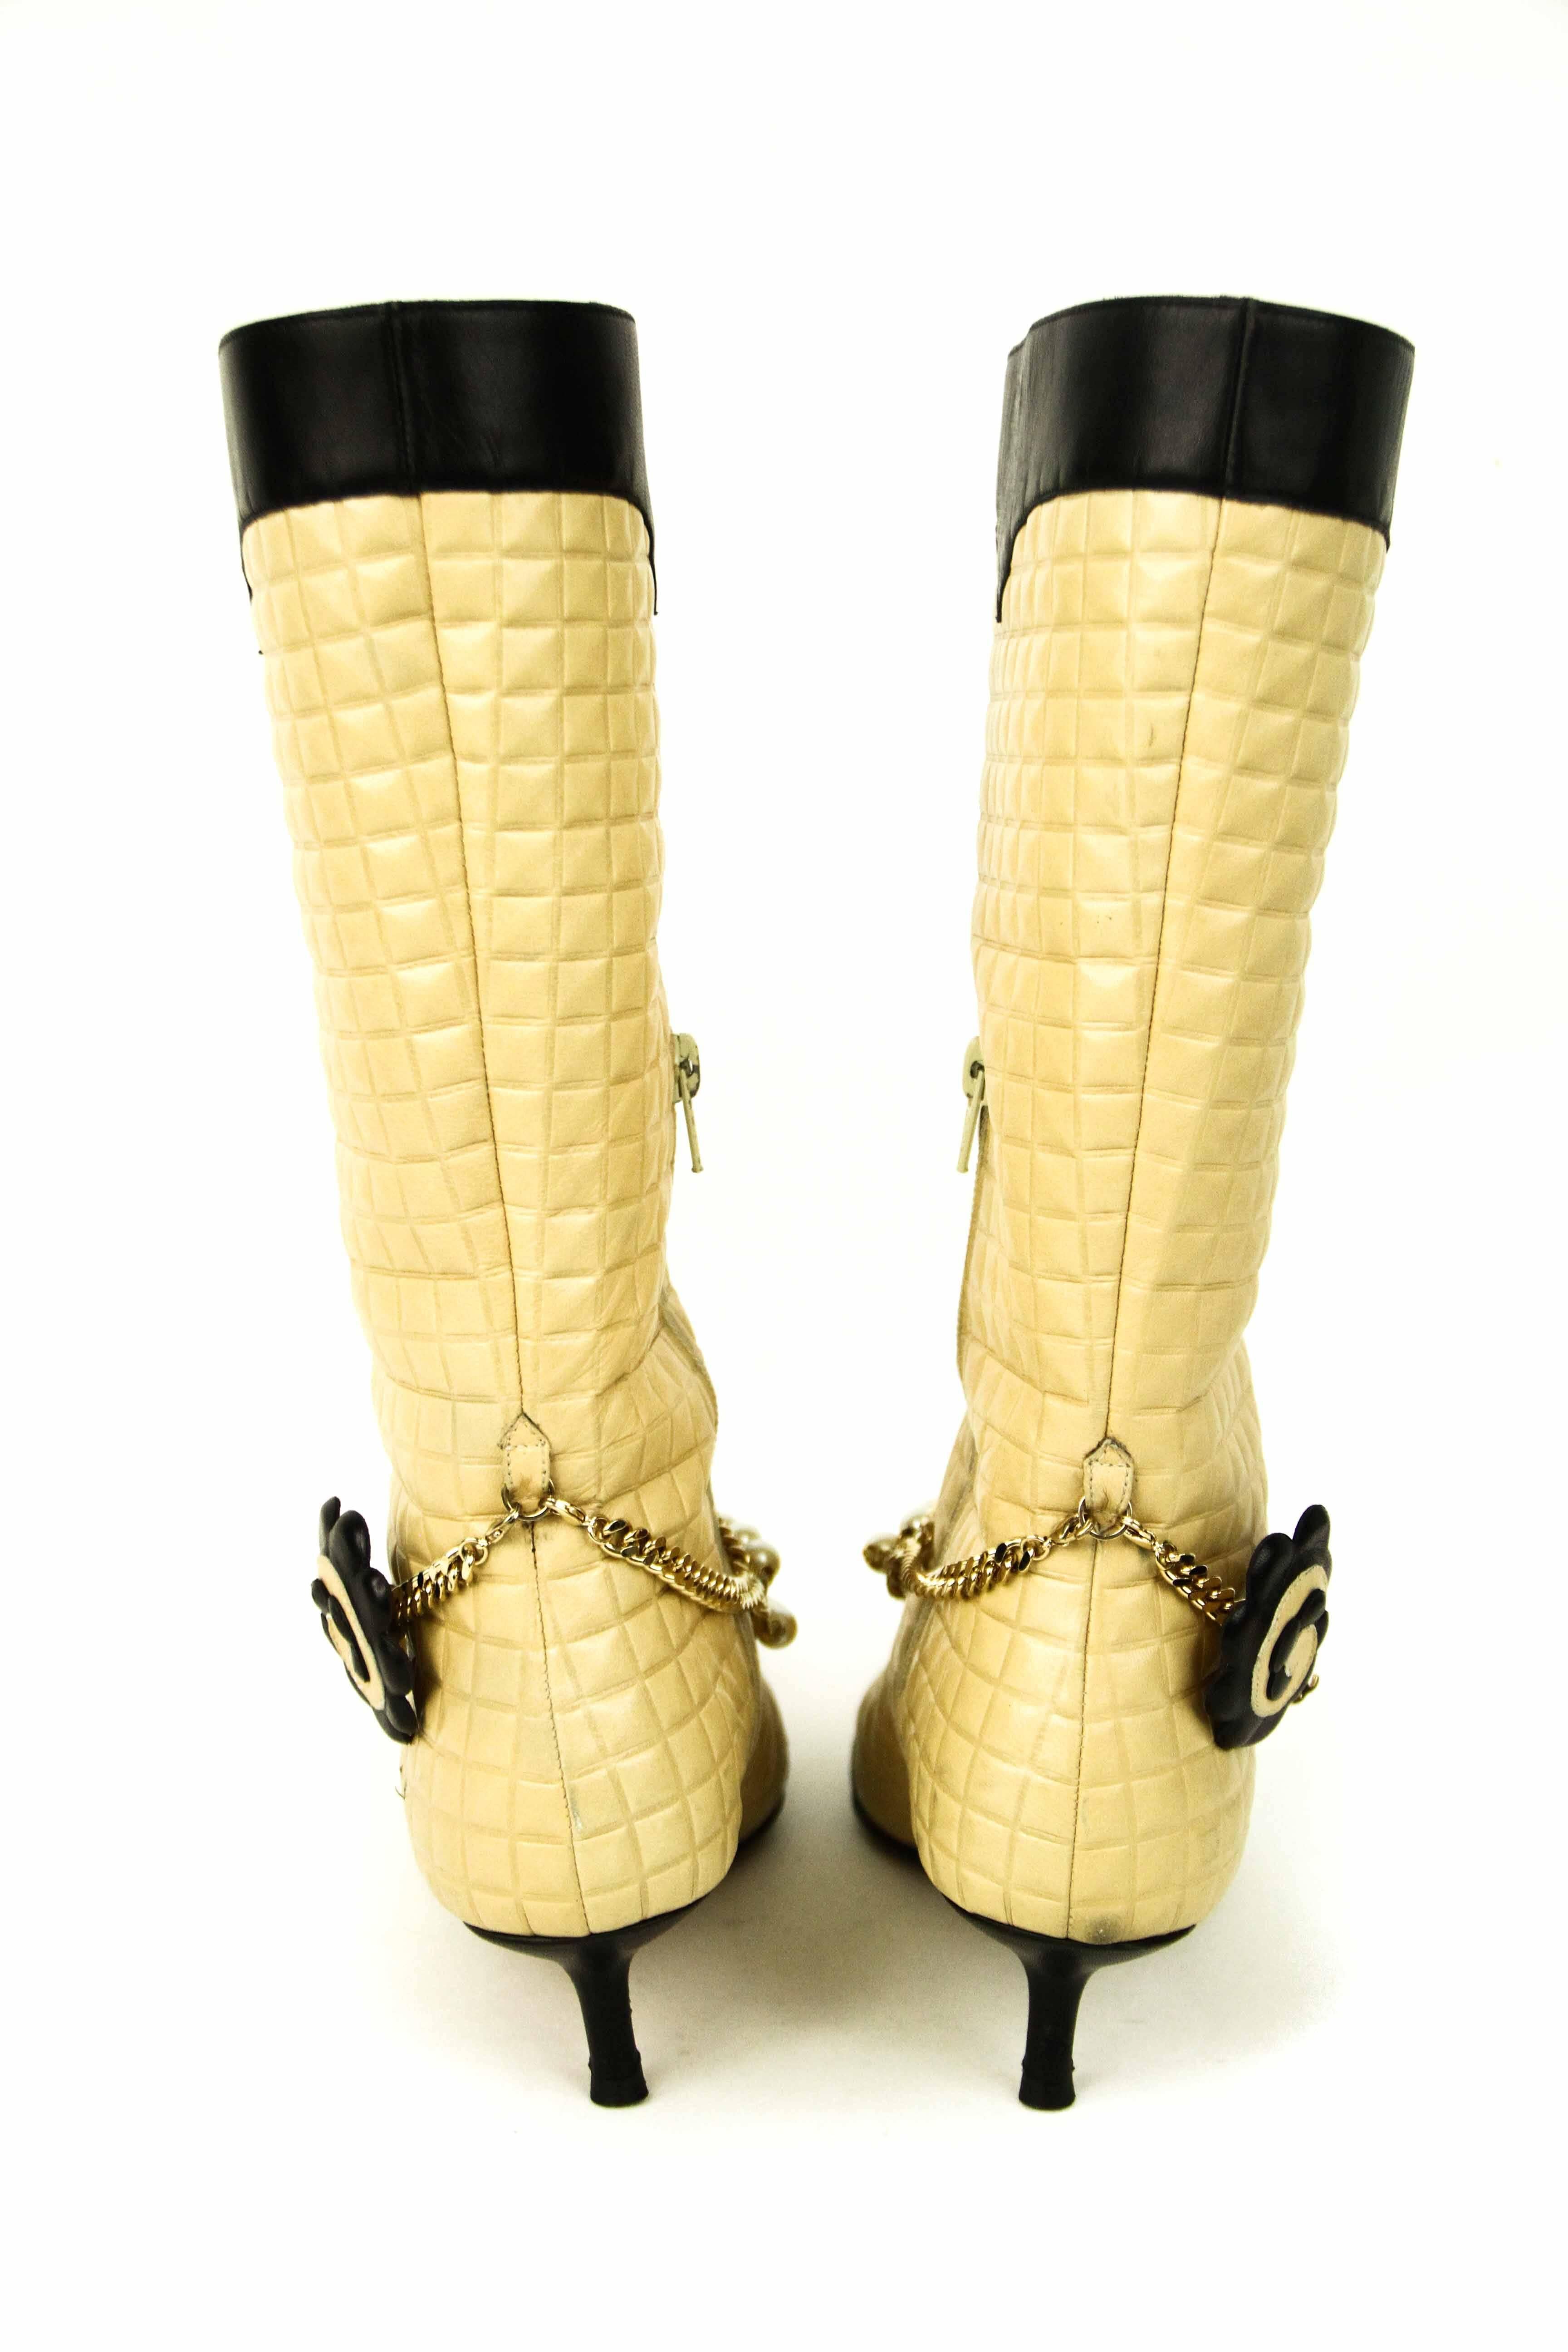 Orange CHANEL Quilted Boot with Pearls and Camellia Flower 39.5